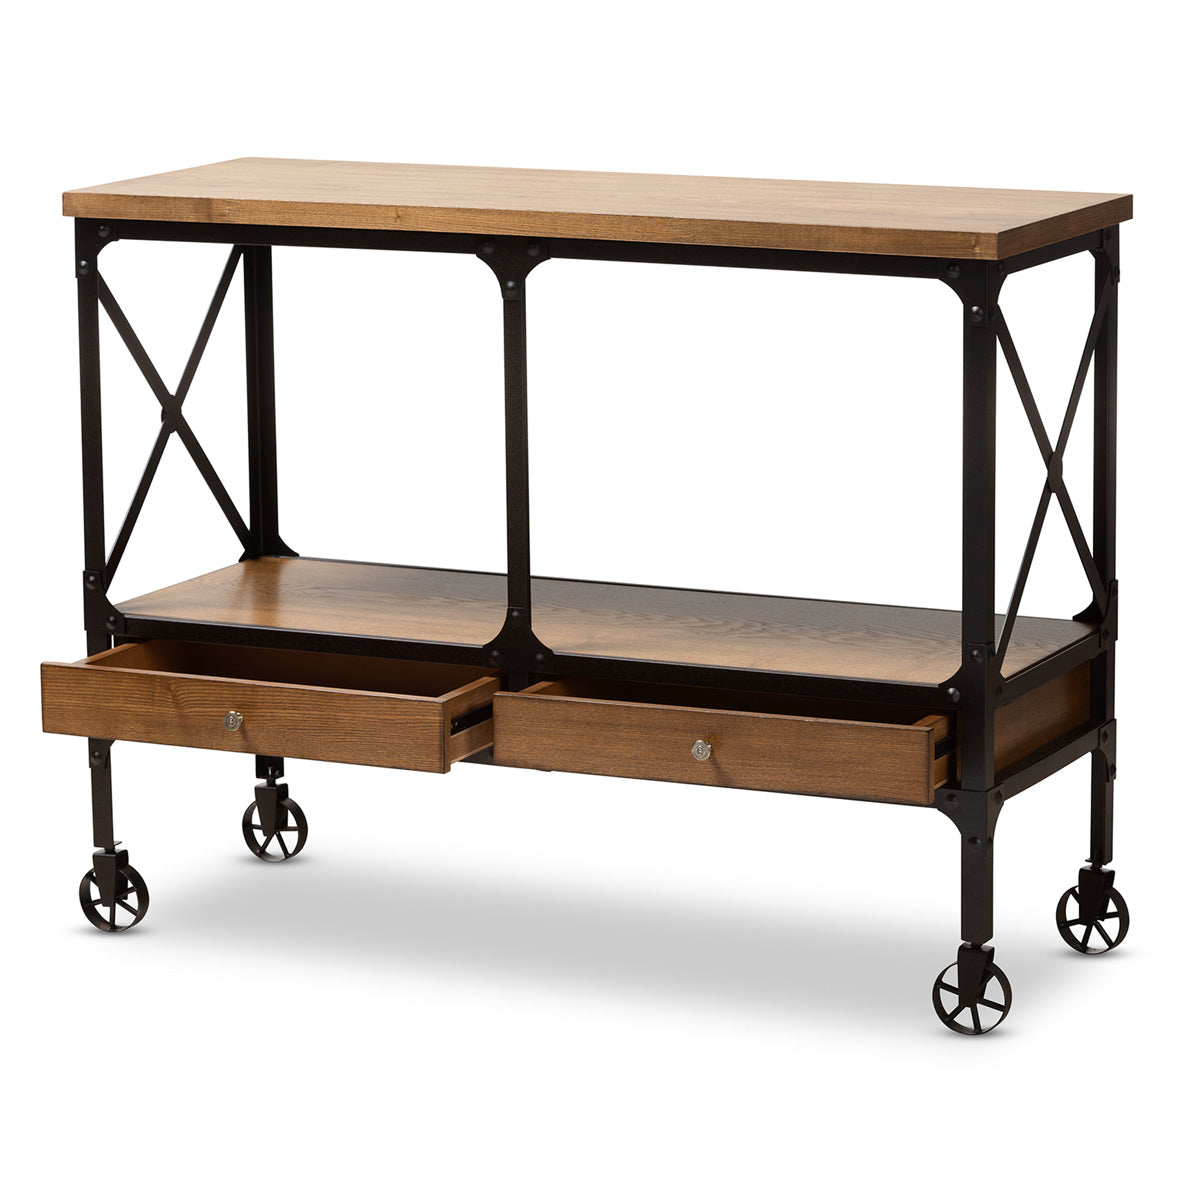 Baxton Studio Alves Vintage Rustic Industrial Style Wood and Dark Bronze Finished Metal Wheeled Console Table with Drawers Baxton Studio-0-Minimal And Modern - 2